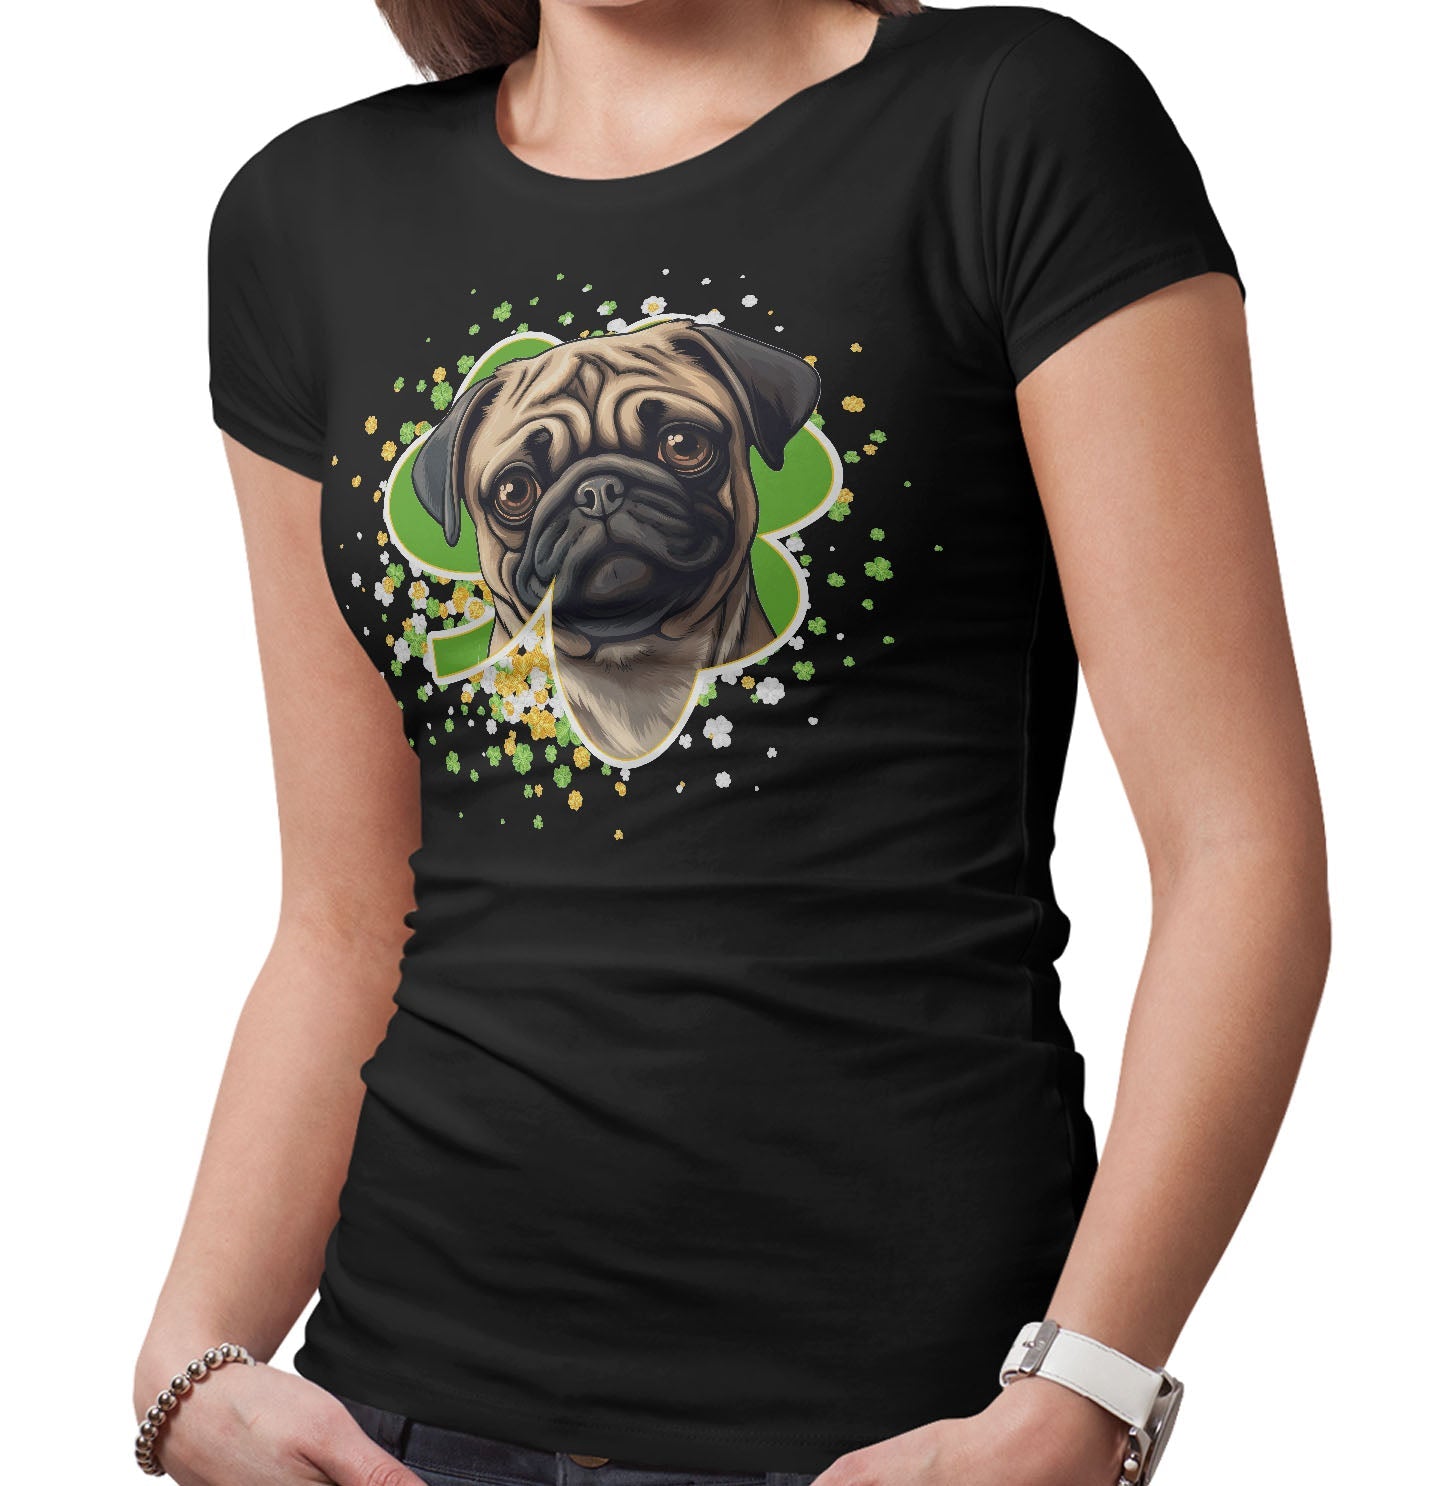 Big Clover St. Patrick's Day Pug - Women's Fitted T-Shirt